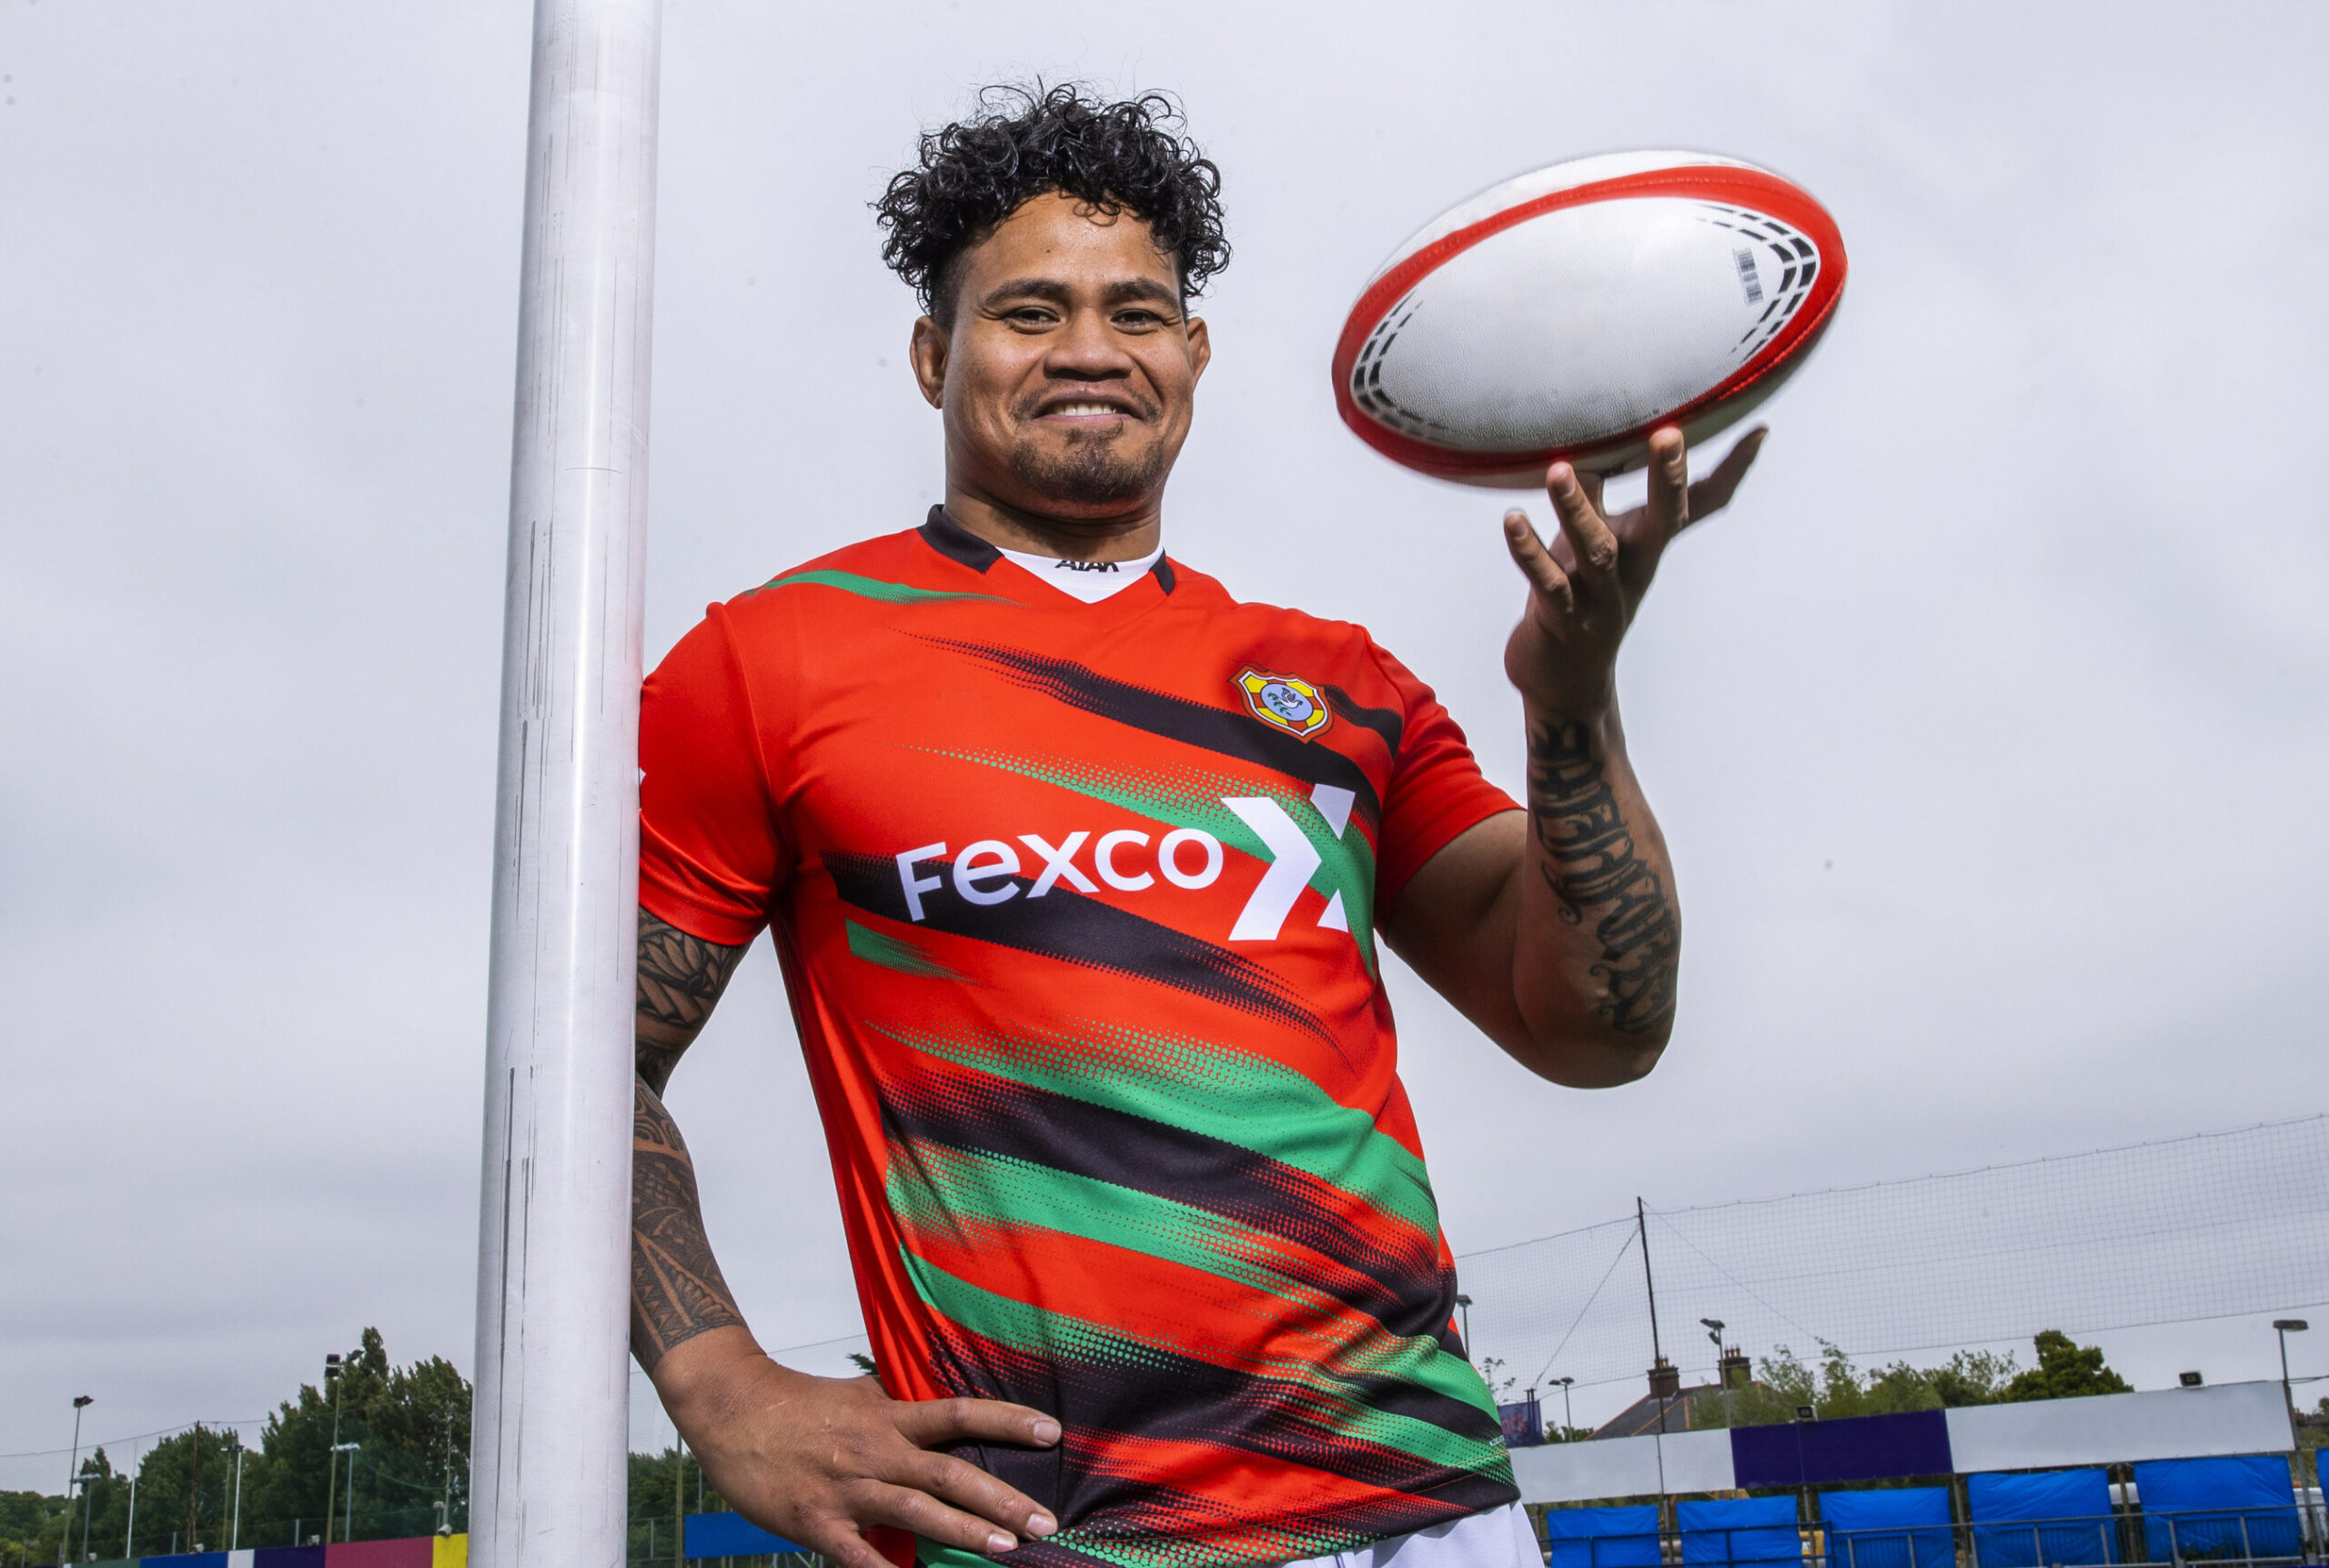 Fexco Announces Corporate Sponsorship of Tonga Rugby Team